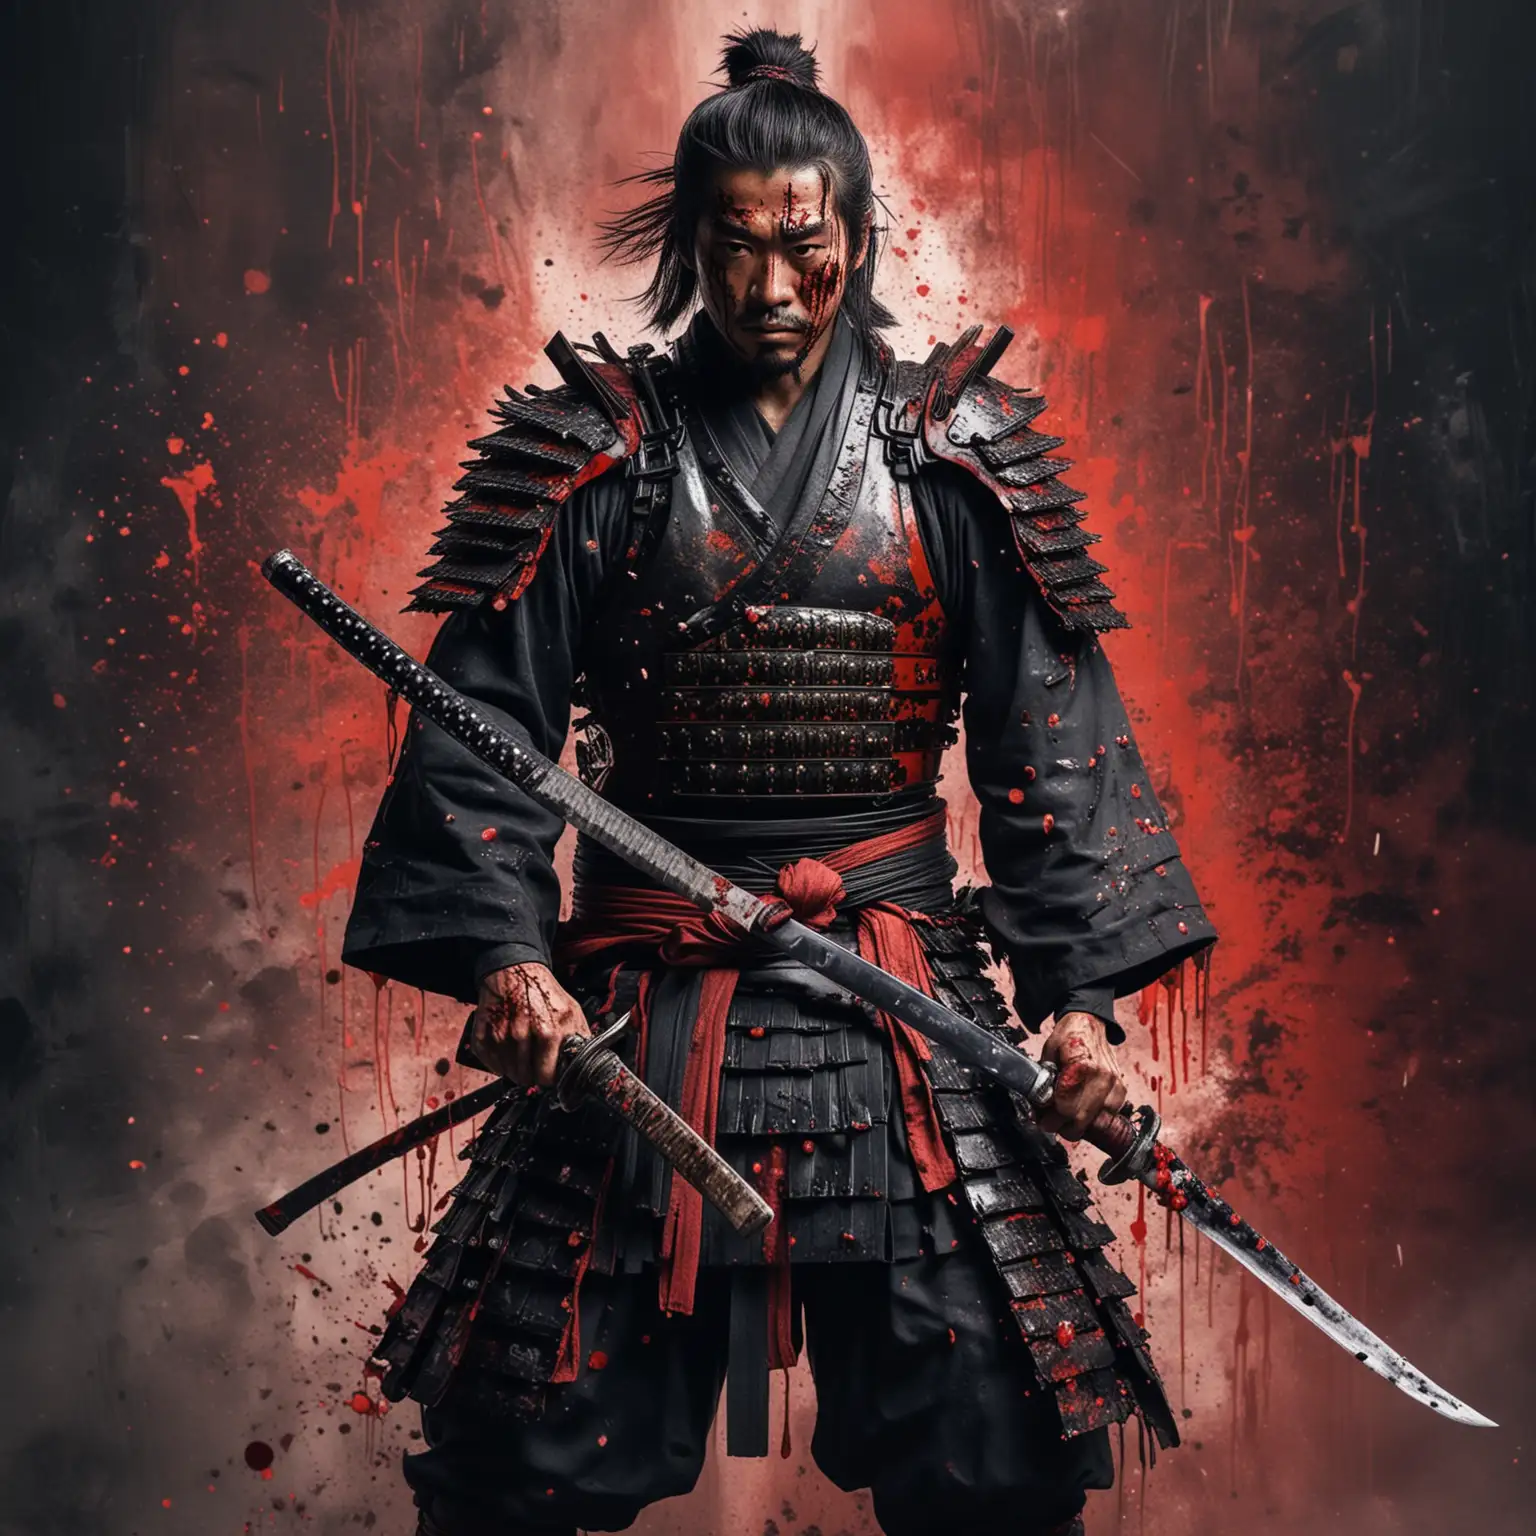 A samurai holding katana and his armor covered in blood with explosive background